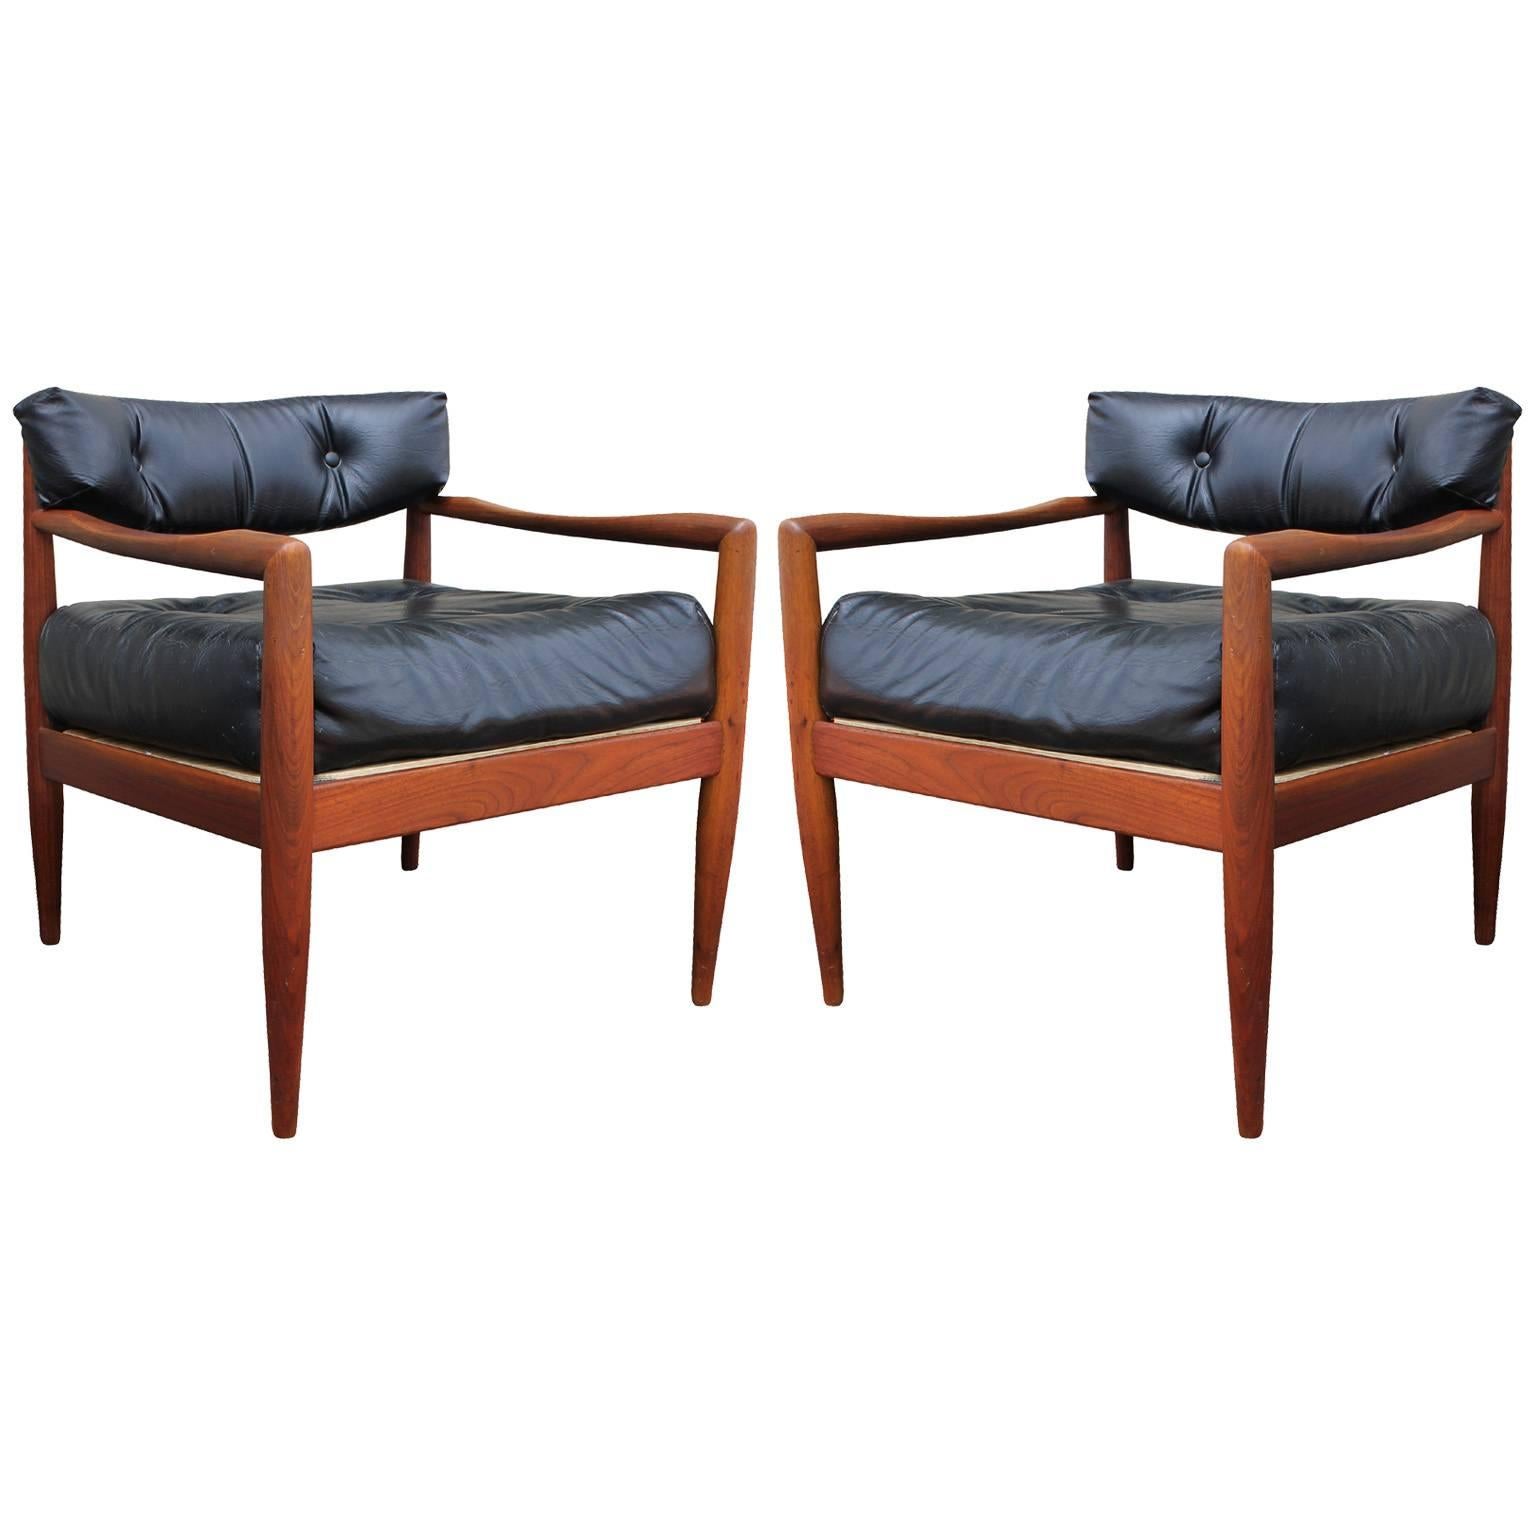 Sculptural Pair of Adrian Pearsall Walnut Lounge Chairs